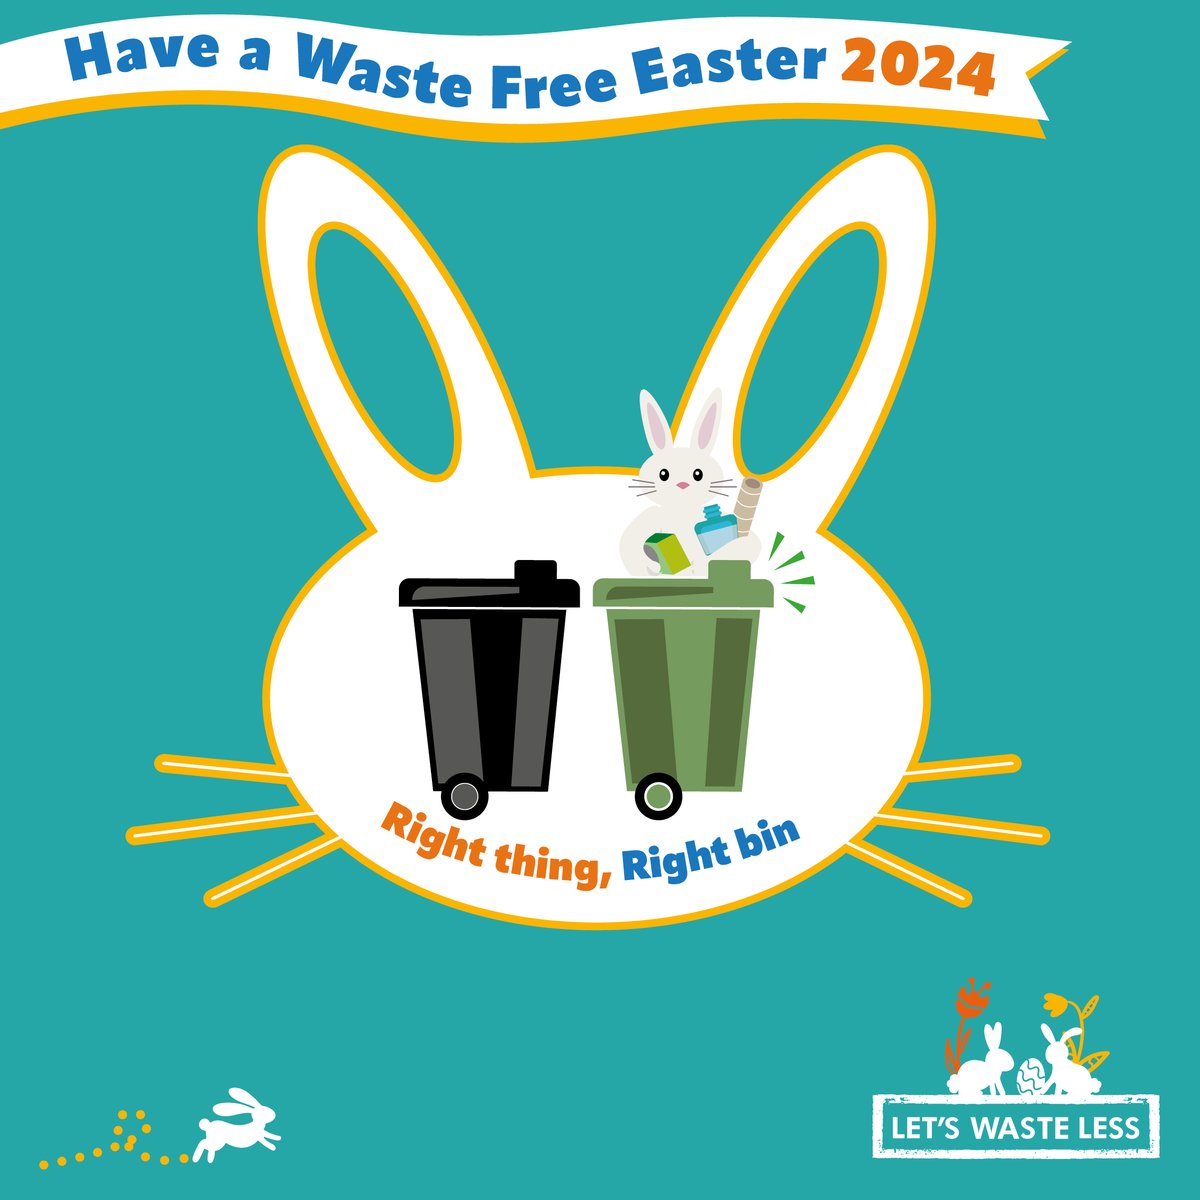 🌸 As we celebrate Easter, remember to only put recyclable items in your green bin - the right thing, right bin, clean and loose. Let's keep our planet clean and beautiful for future generations. ♻️ More info bit.ly/3TjOb8s. #letswasteless #wastefreeeaster